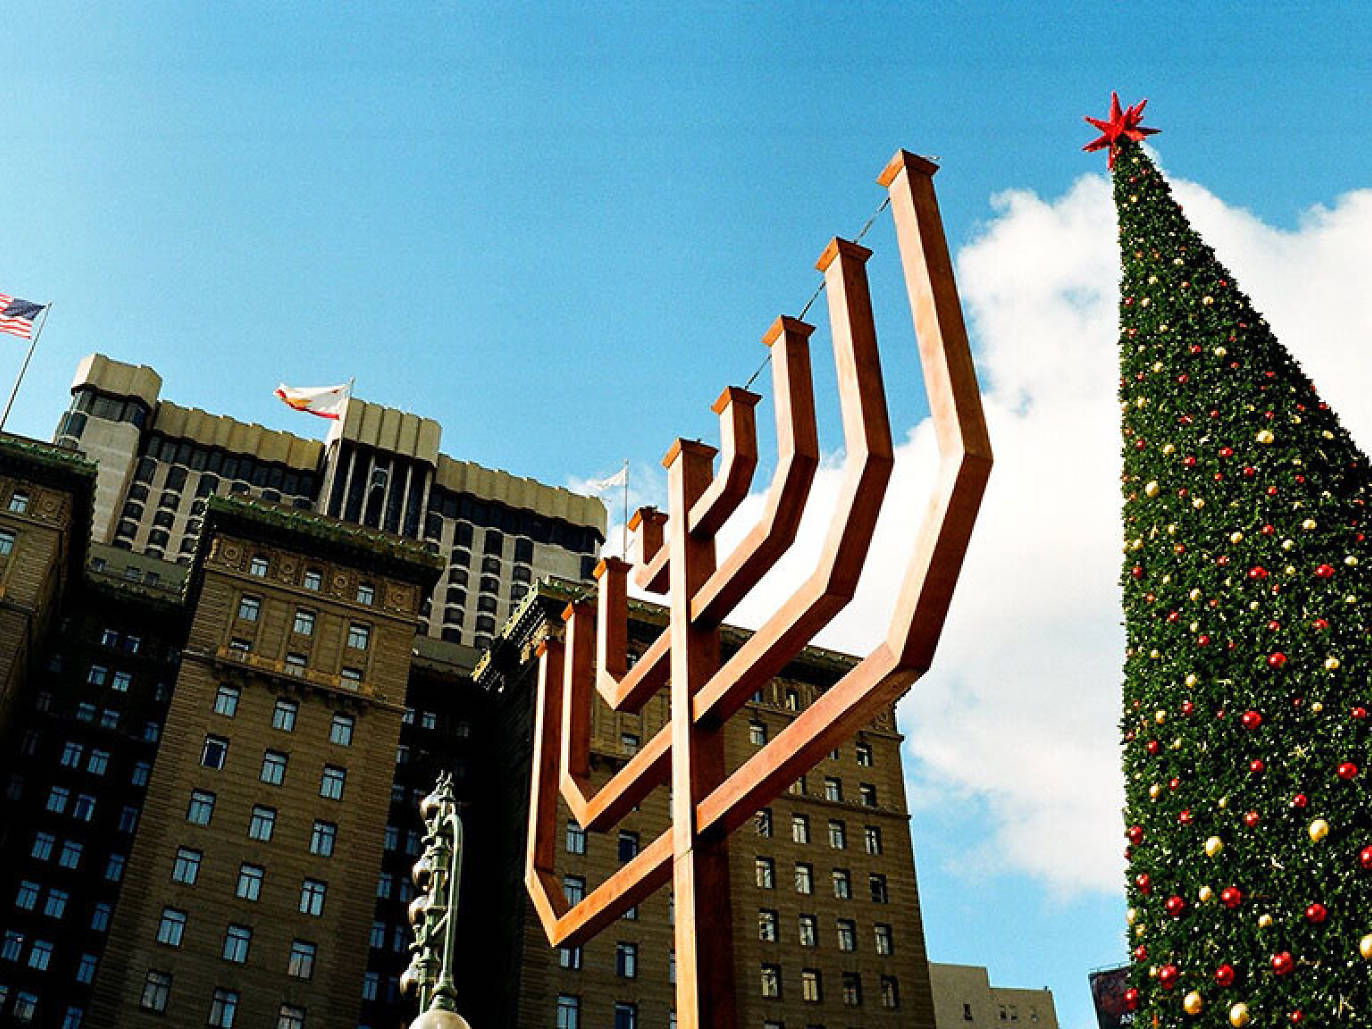 Photos of Christmas in San Francisco, from Union Square to the Fairmont ...